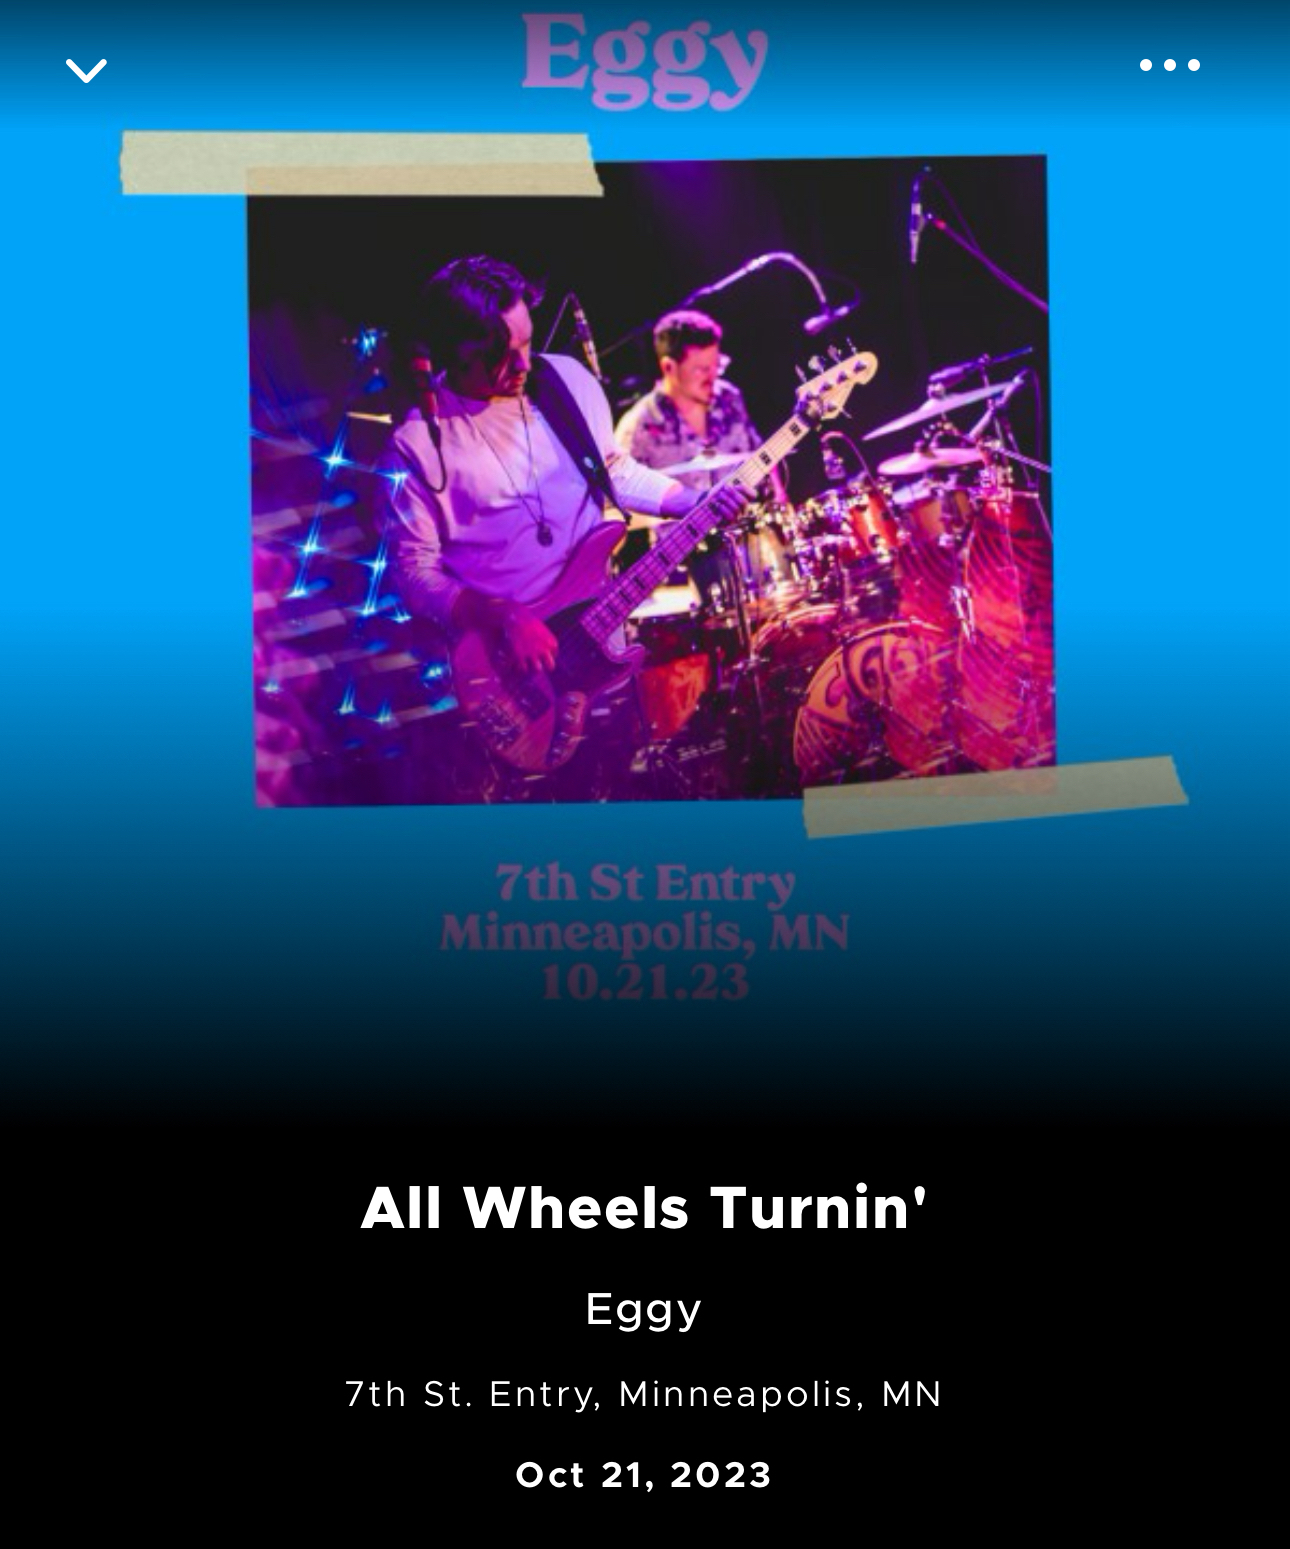 Promotional image for a music performance by the band Eggy, showing two band members on stage with a bass guitar and drums, set for October 21, 2023, at 7th St. Entry in Minneapolis, MN. The event